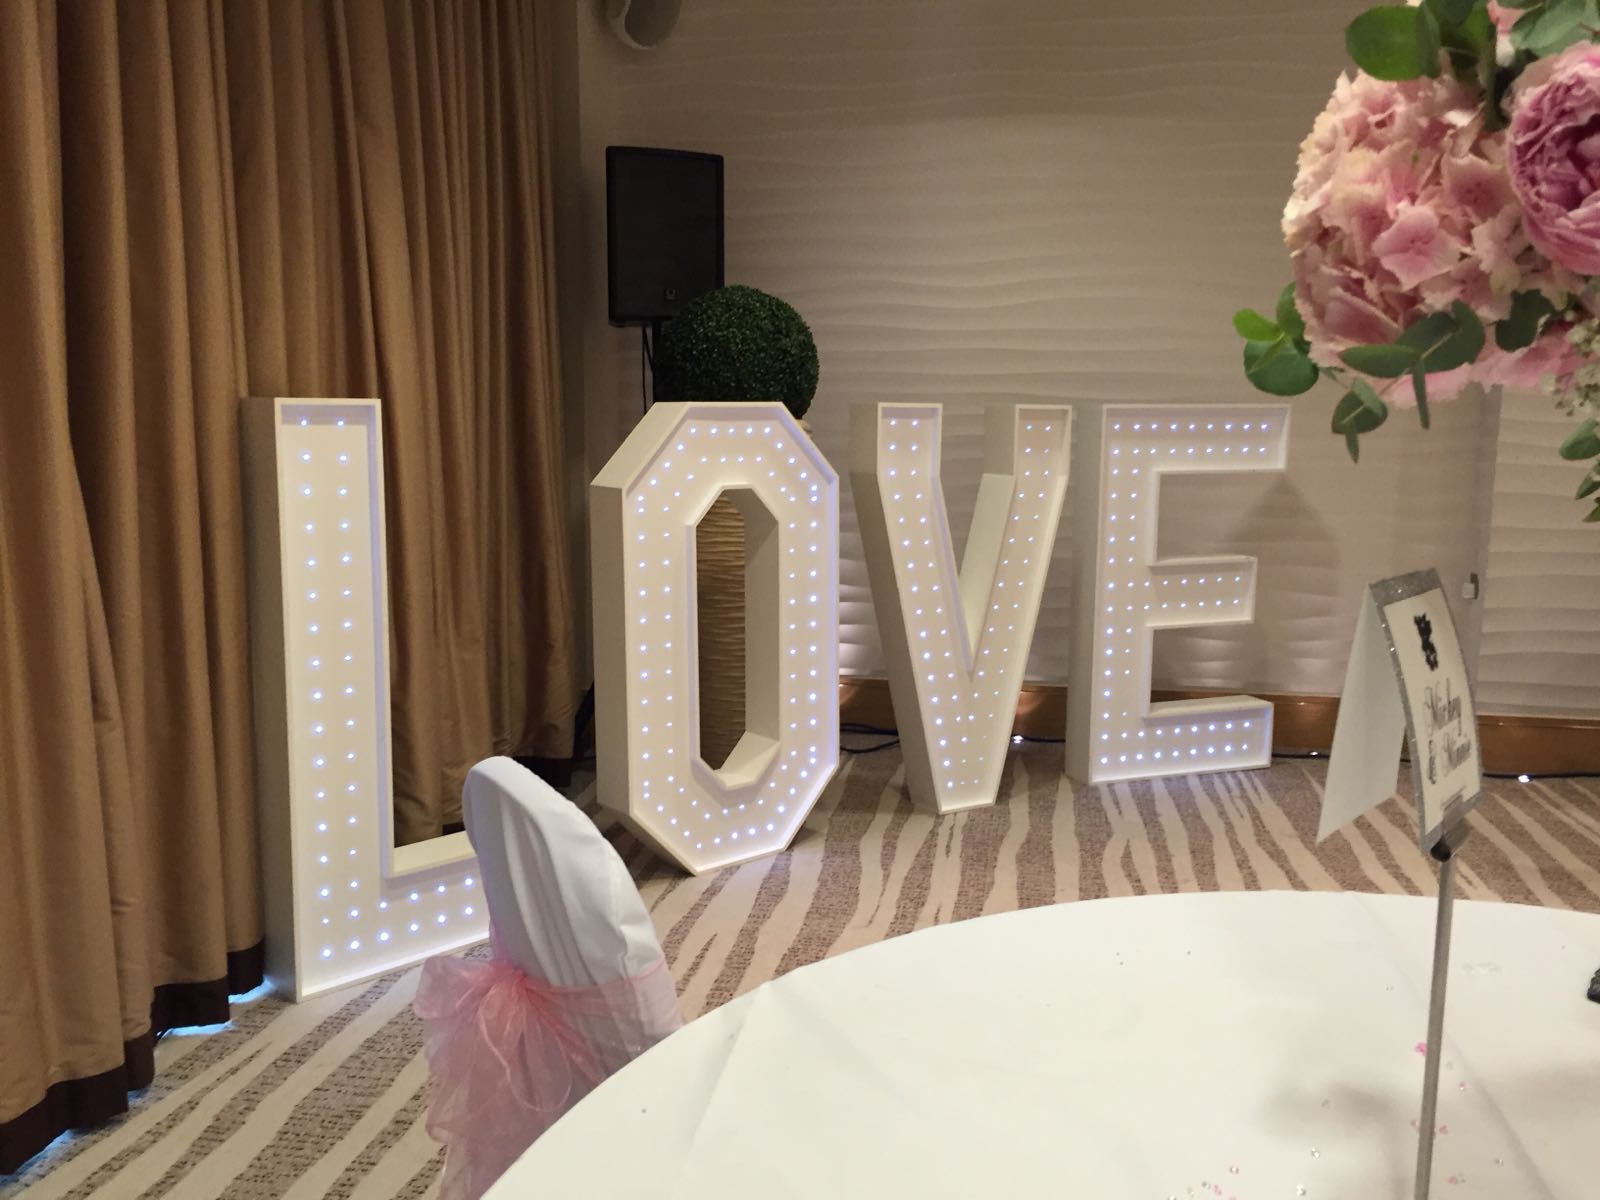 4 Foot Love Letters For your Special Day